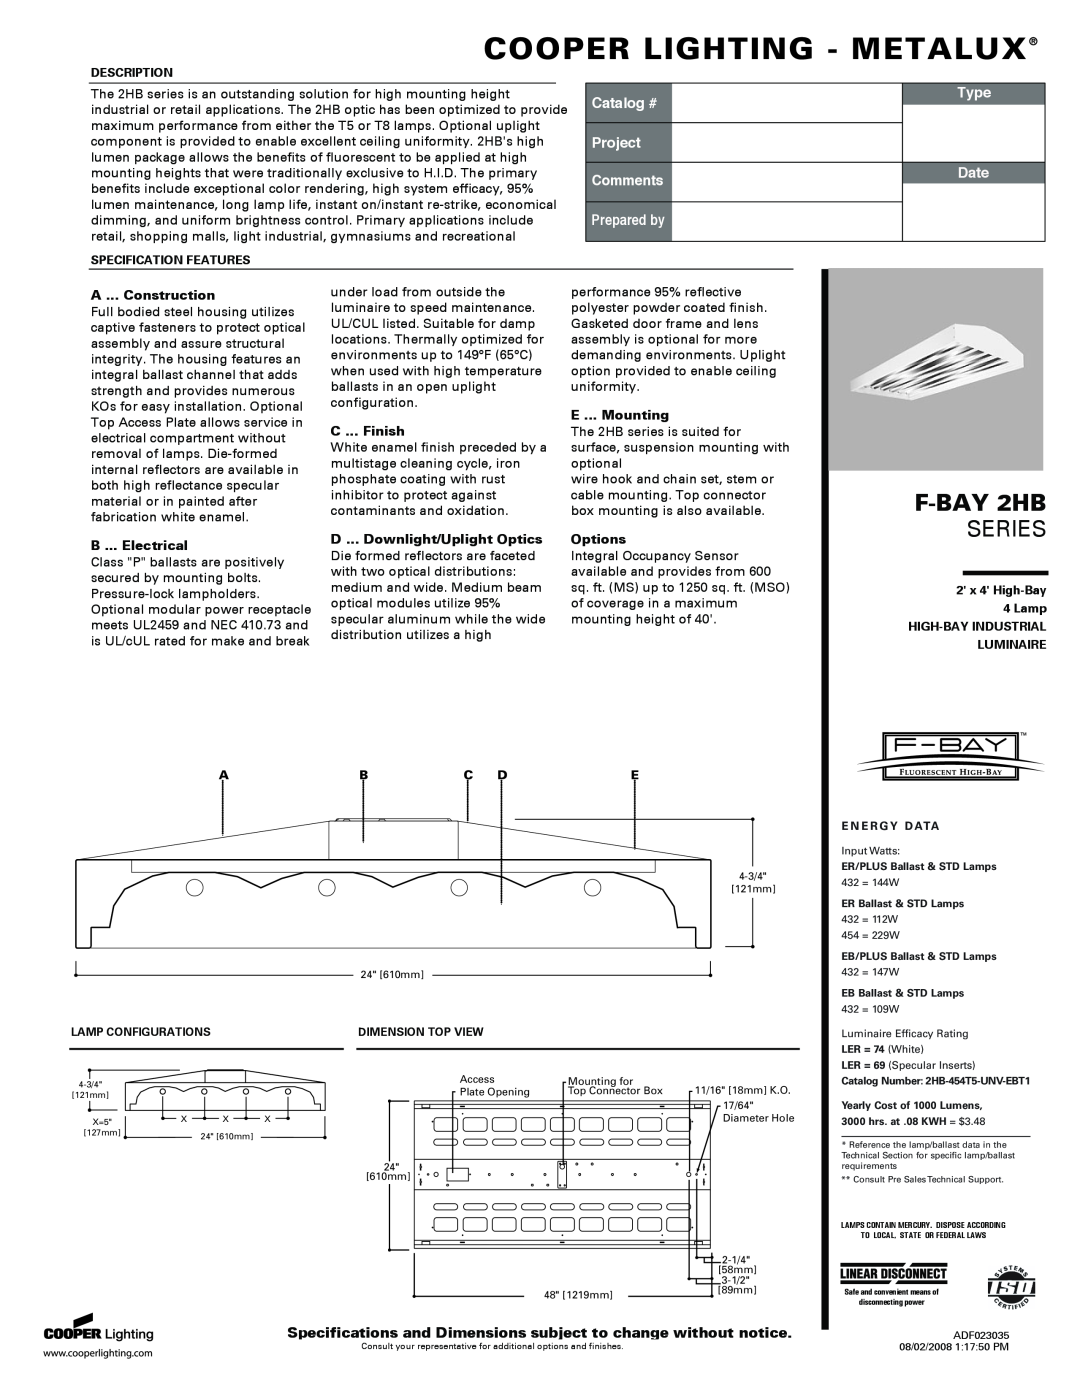 Cooper Lighting 901 specifications Cooper Lighting - Metalux, F-BAY2HB, Series, Catalog #, Project Comments, Prepared by 